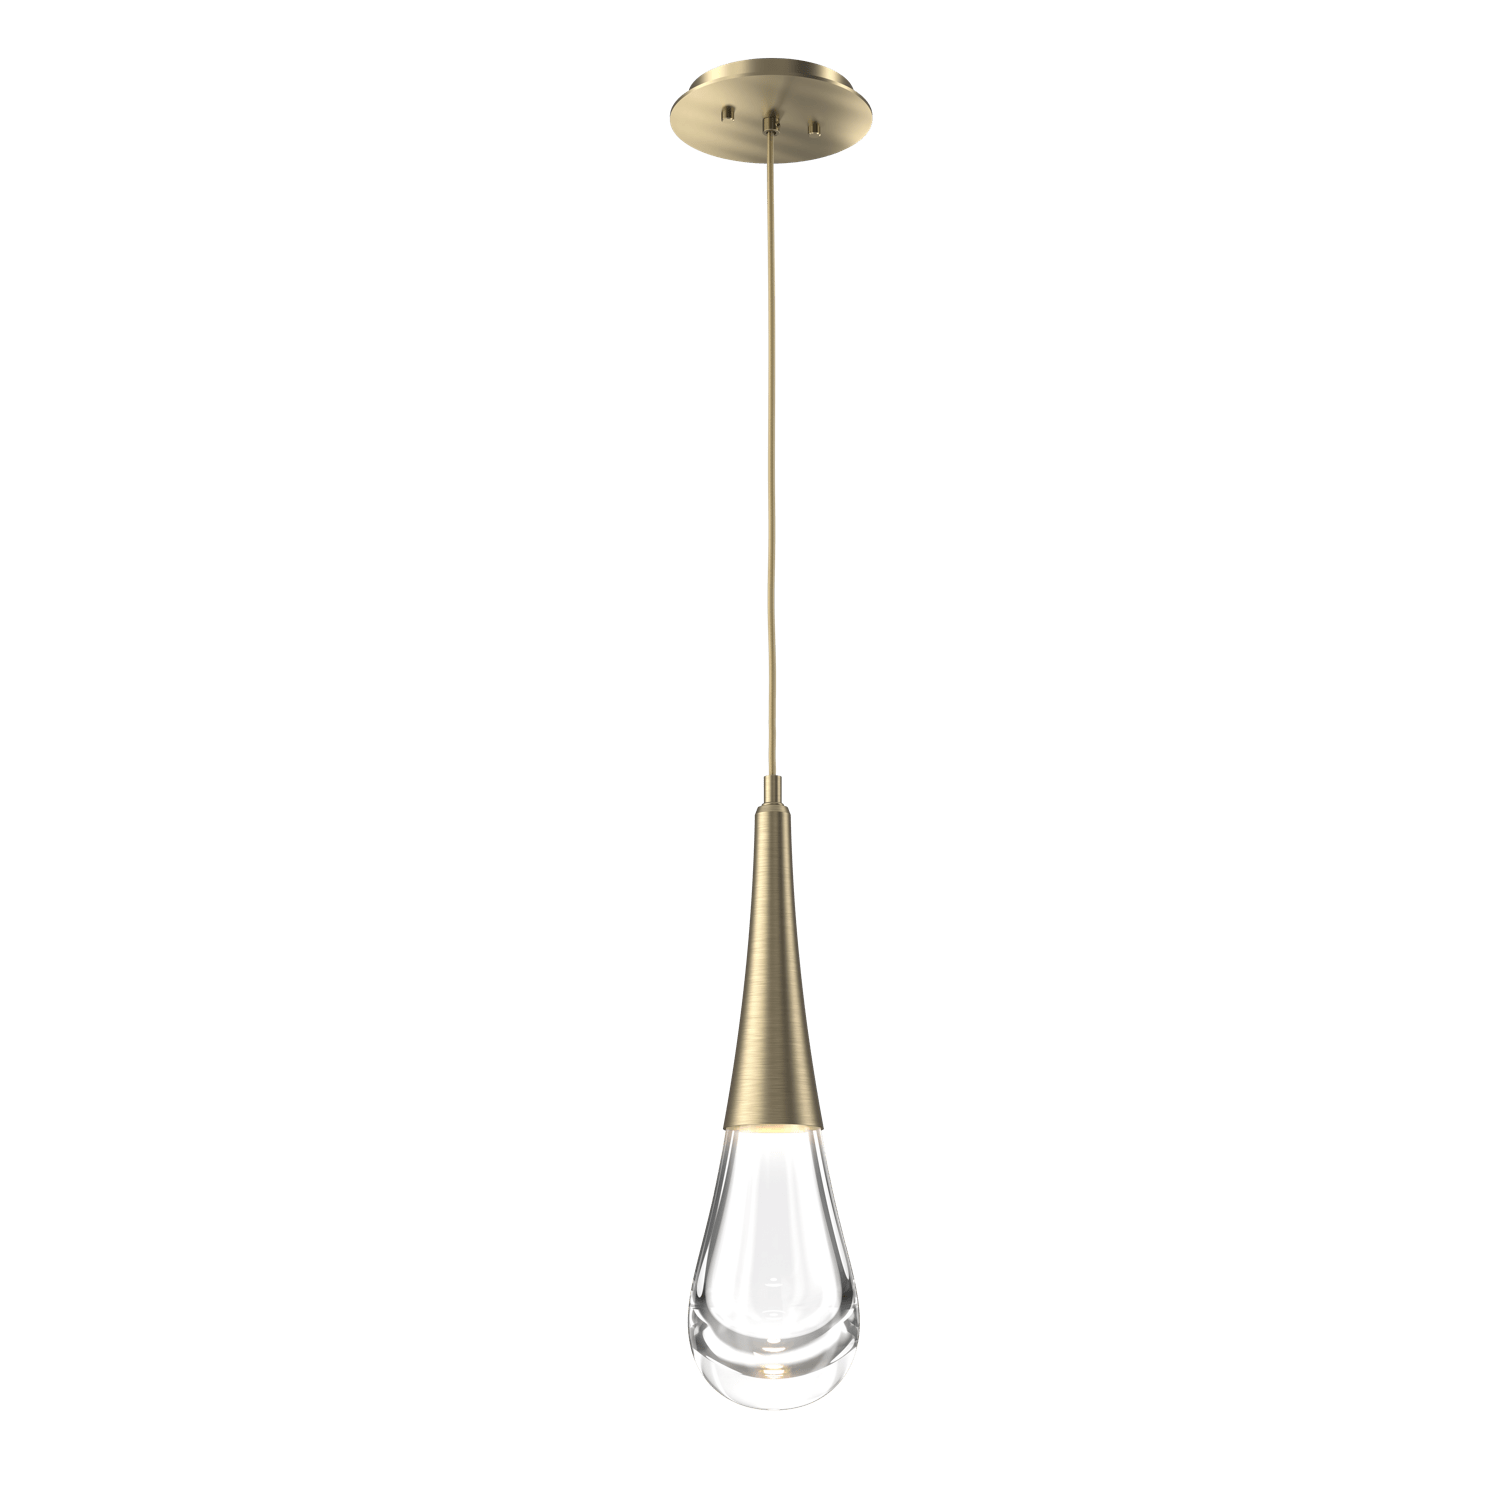 LAB0078-01-HB-Hammerton-Studio-Raindrop-pendant-light-with-heritage-brass-finish-and-clear-blown-glass-shades-and-LED-lamping